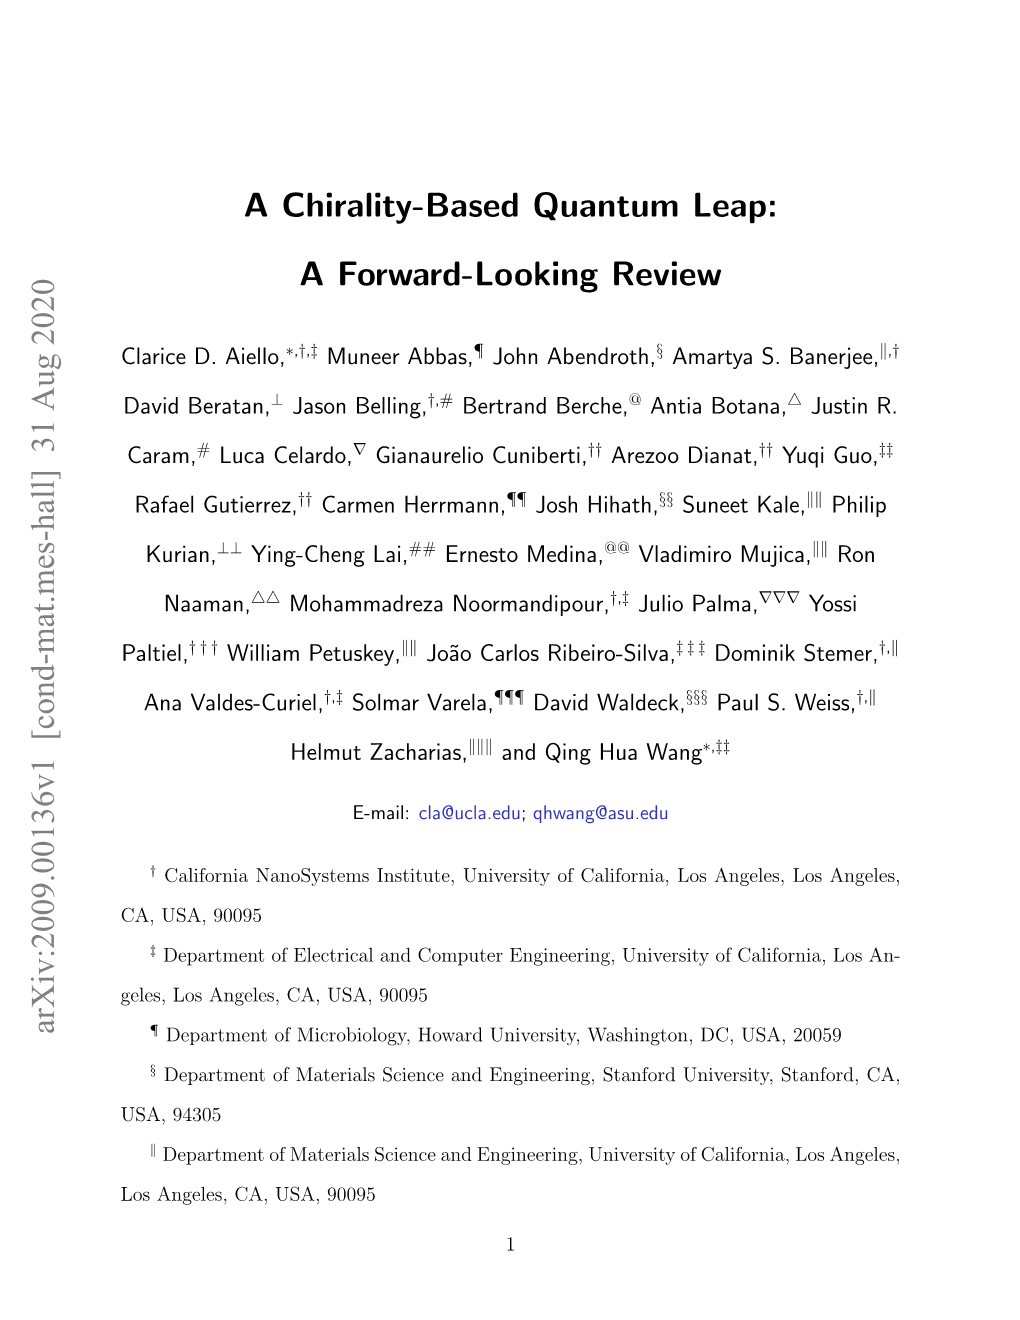 A Chirality-Based Quantum Leap: a Forward-Looking Review Arxiv